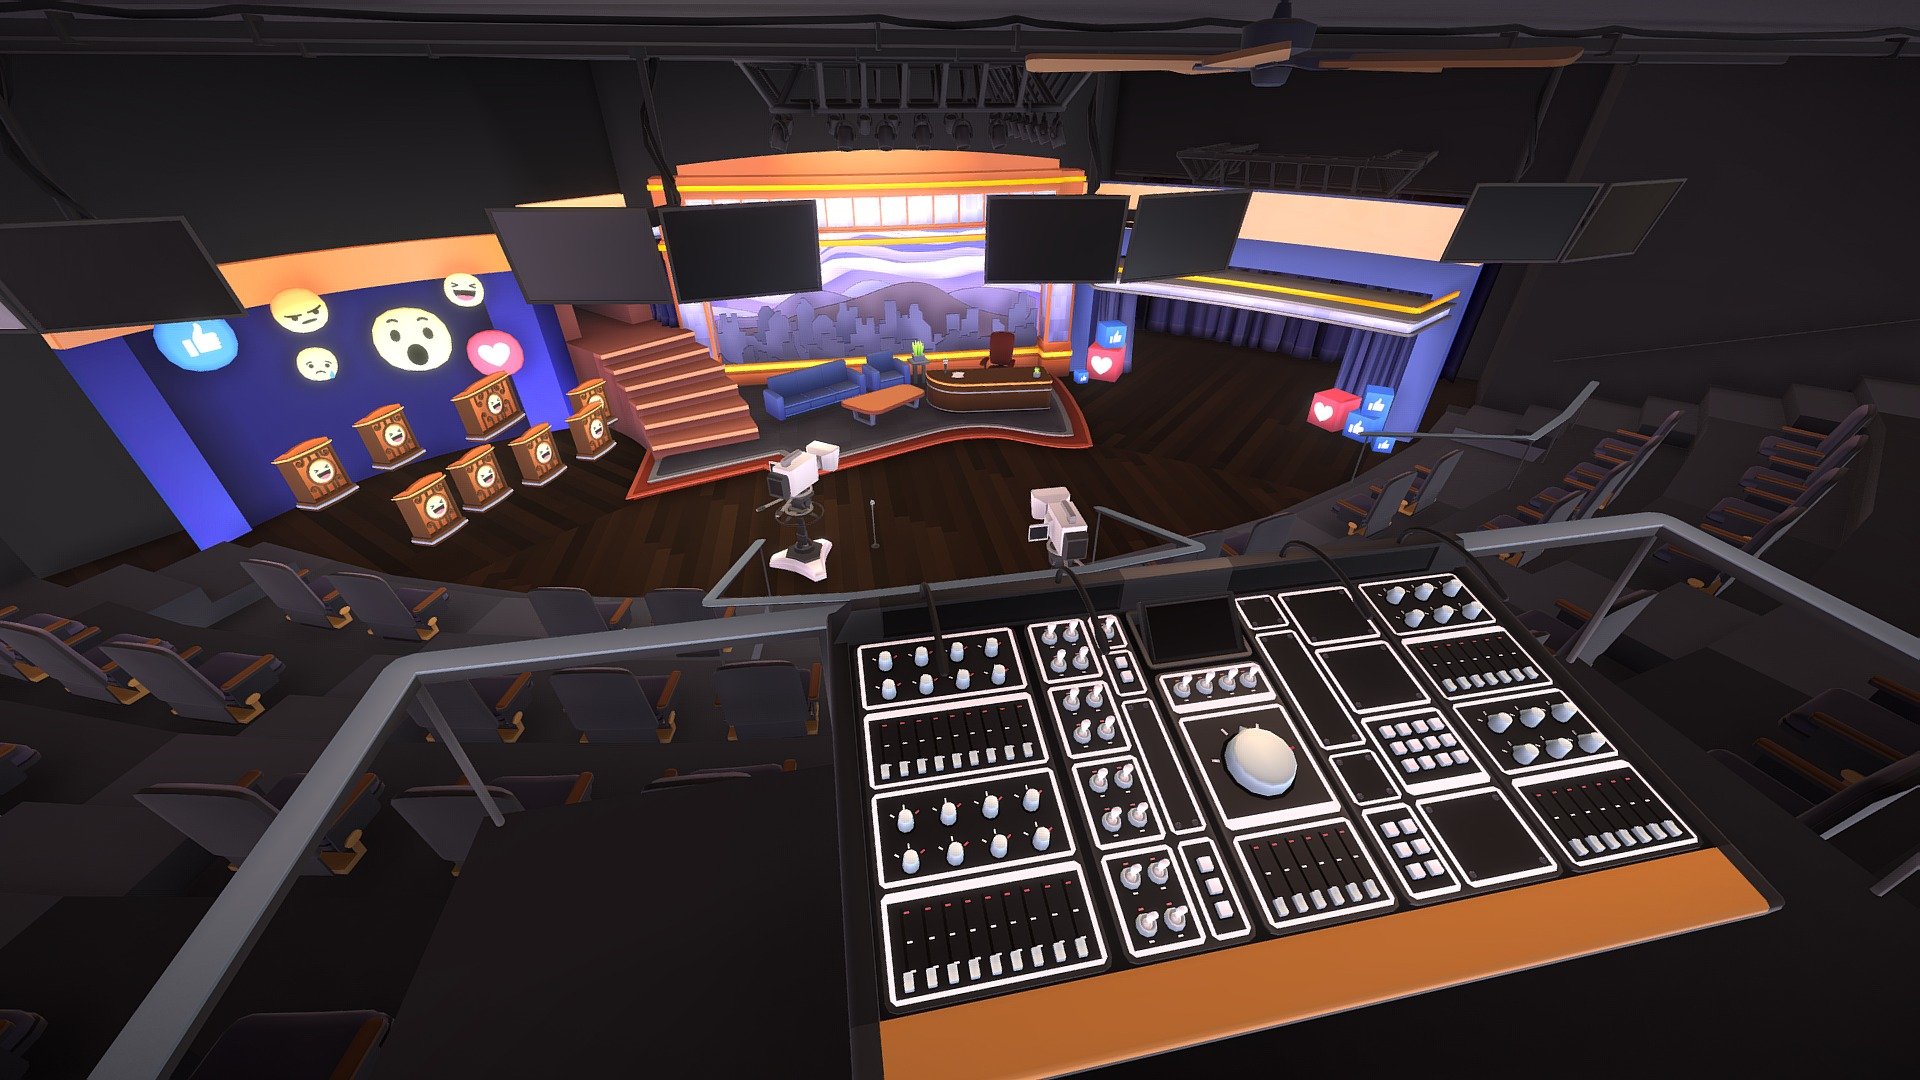 A talkshow set inspired by Late Night TV modeled for a social VR experiment 3d model